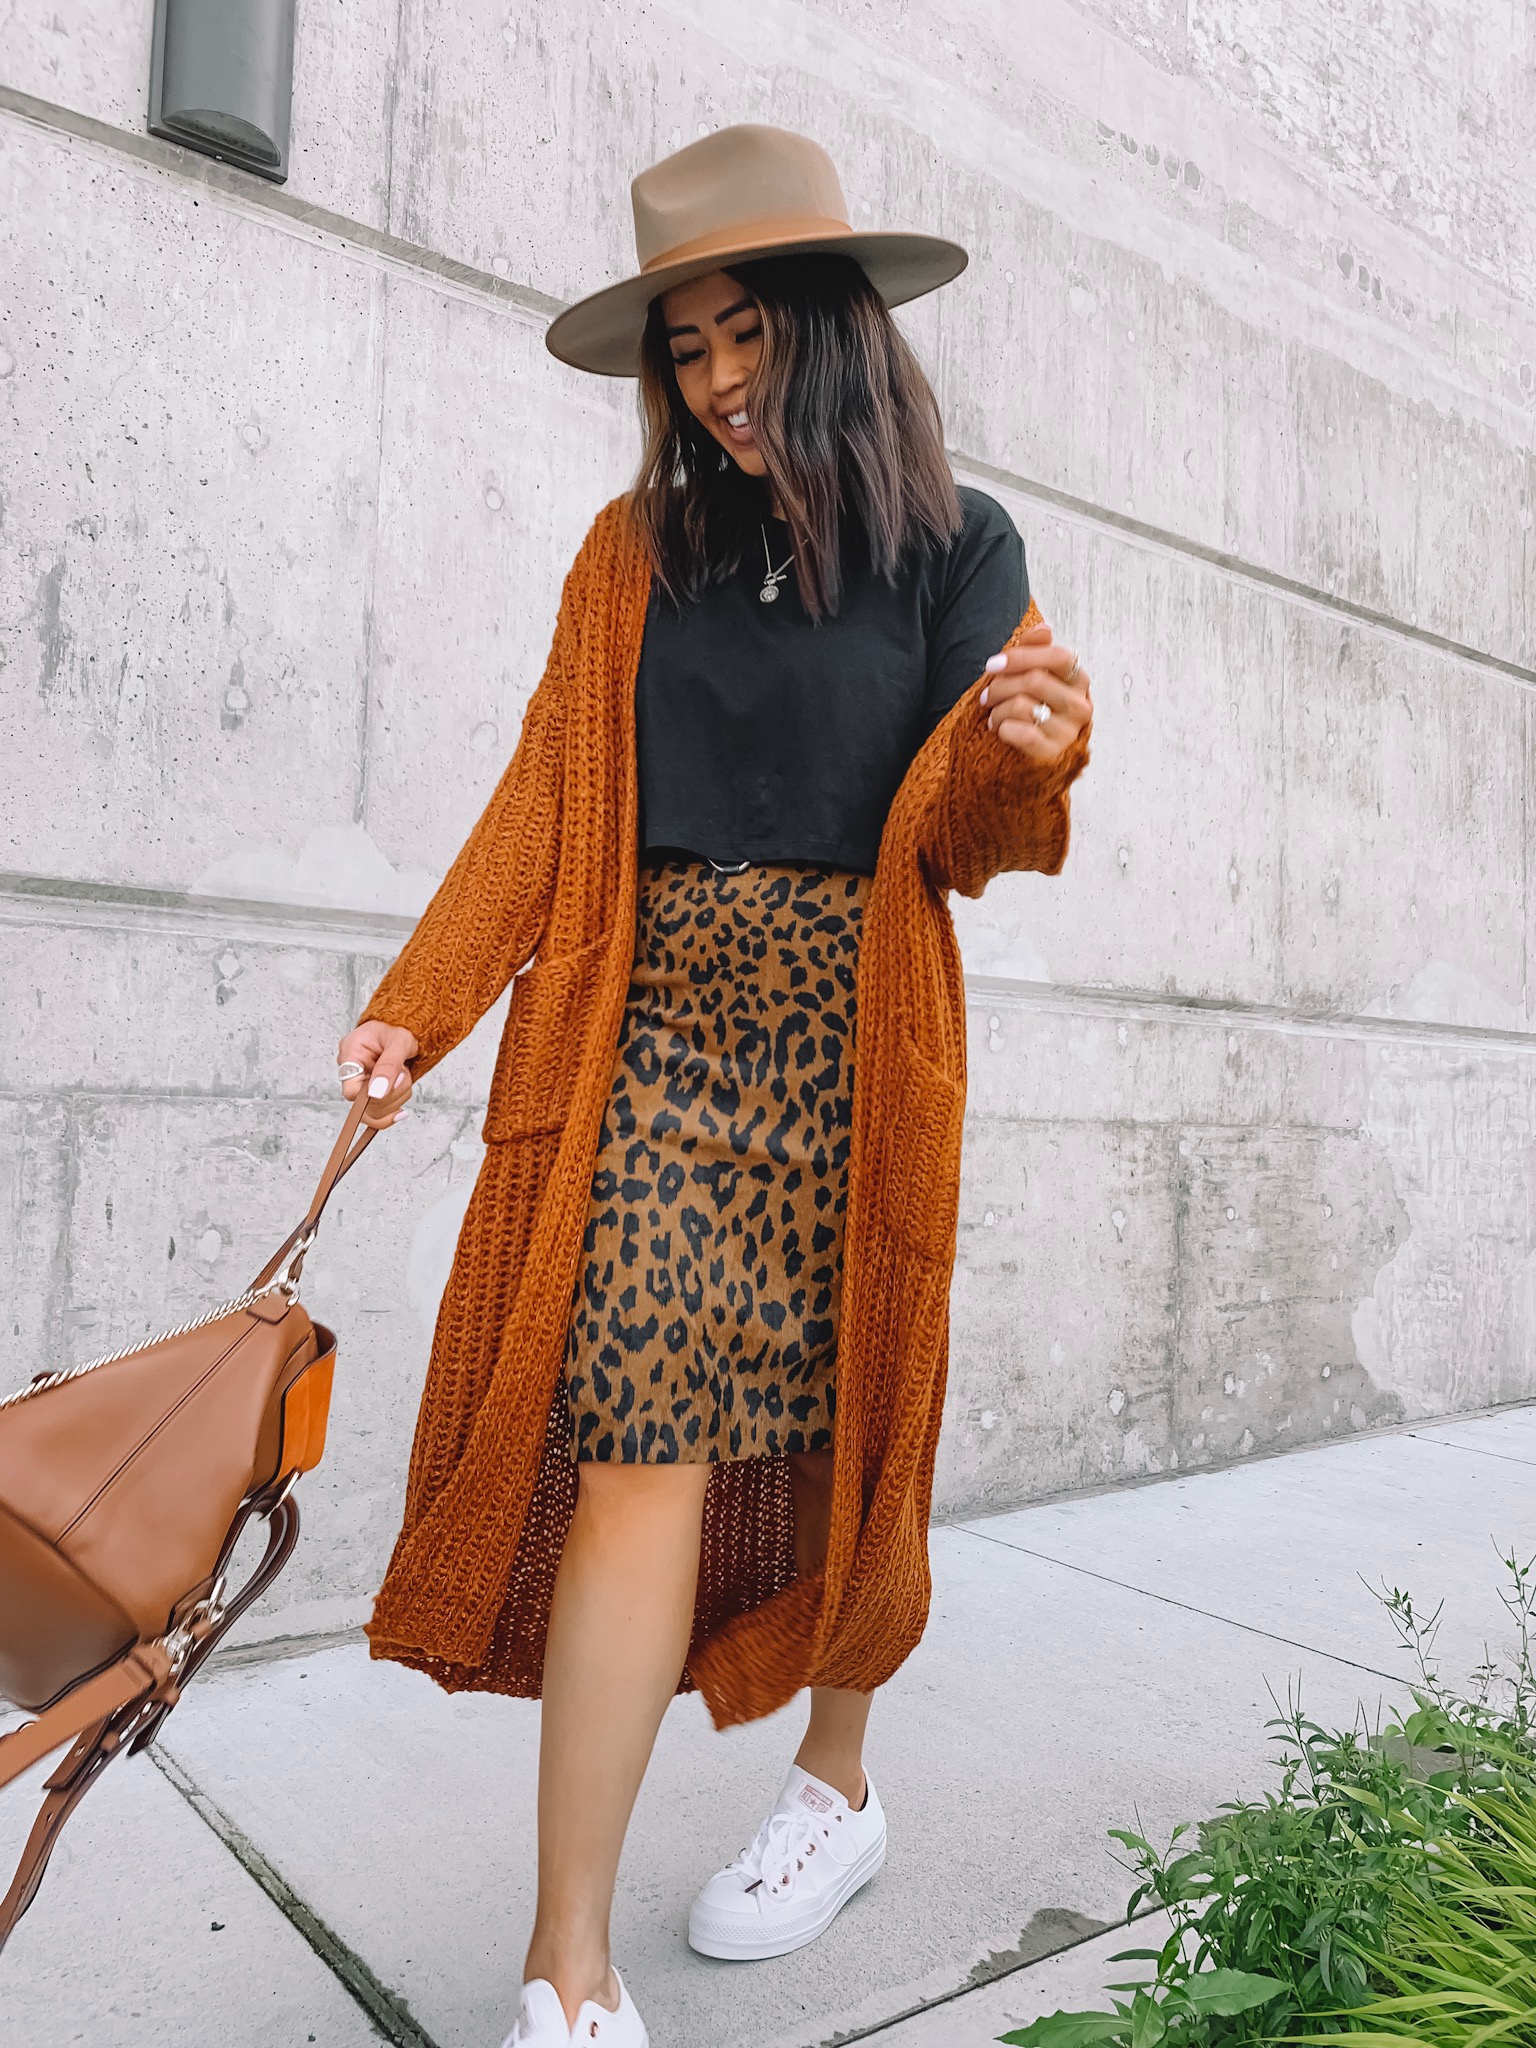 Back to School outfits & Fall Work Outfits 2019 - Gypsy Tan